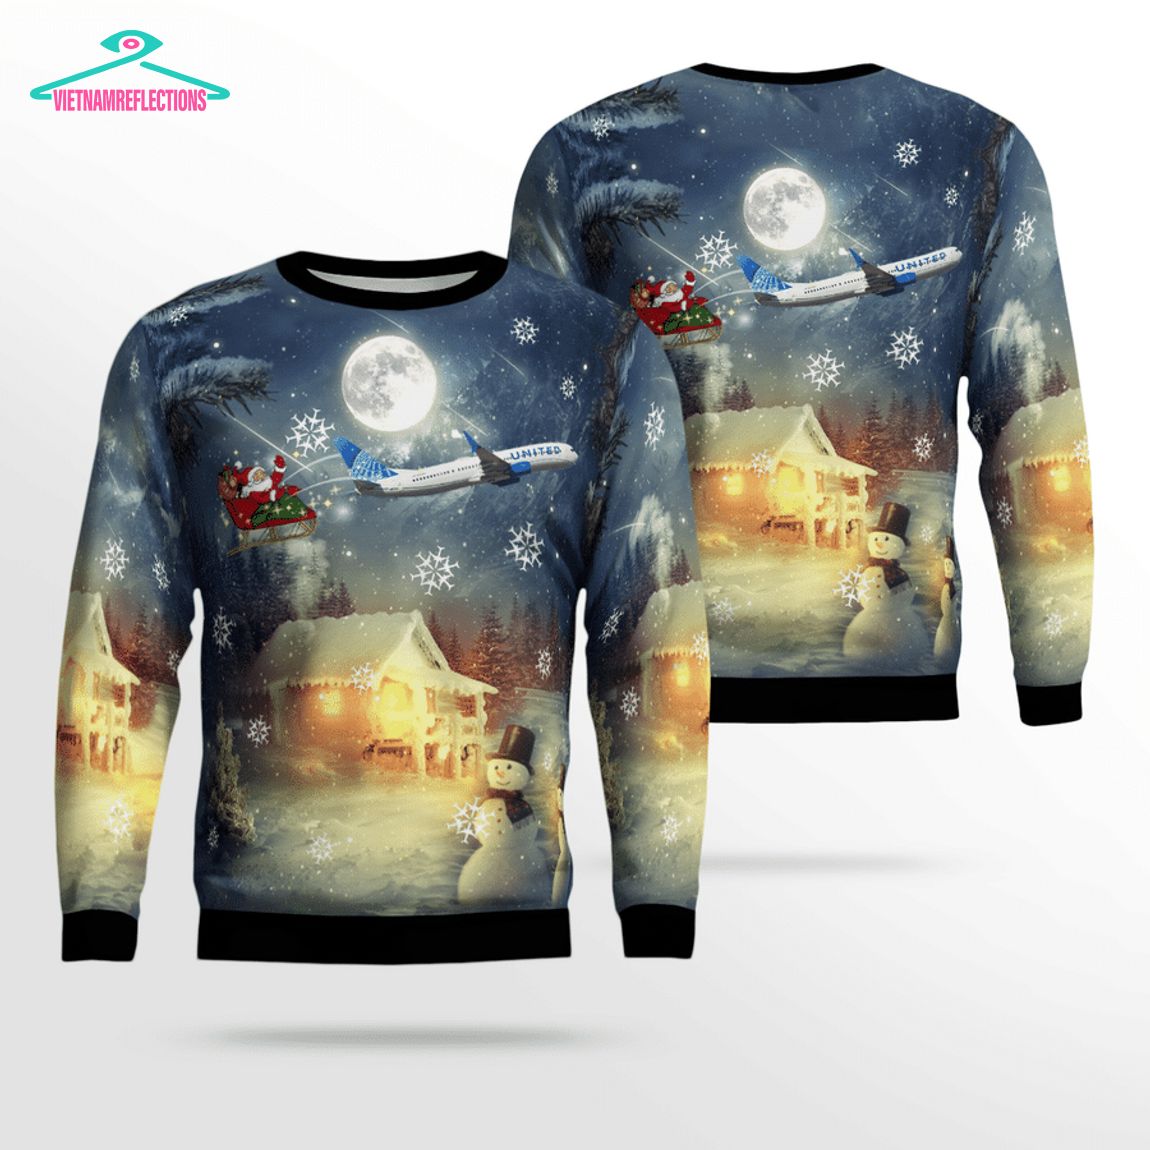 united-airlines-boeing-737-924er-3d-christmas-sweater-1-o4nyH.jpg